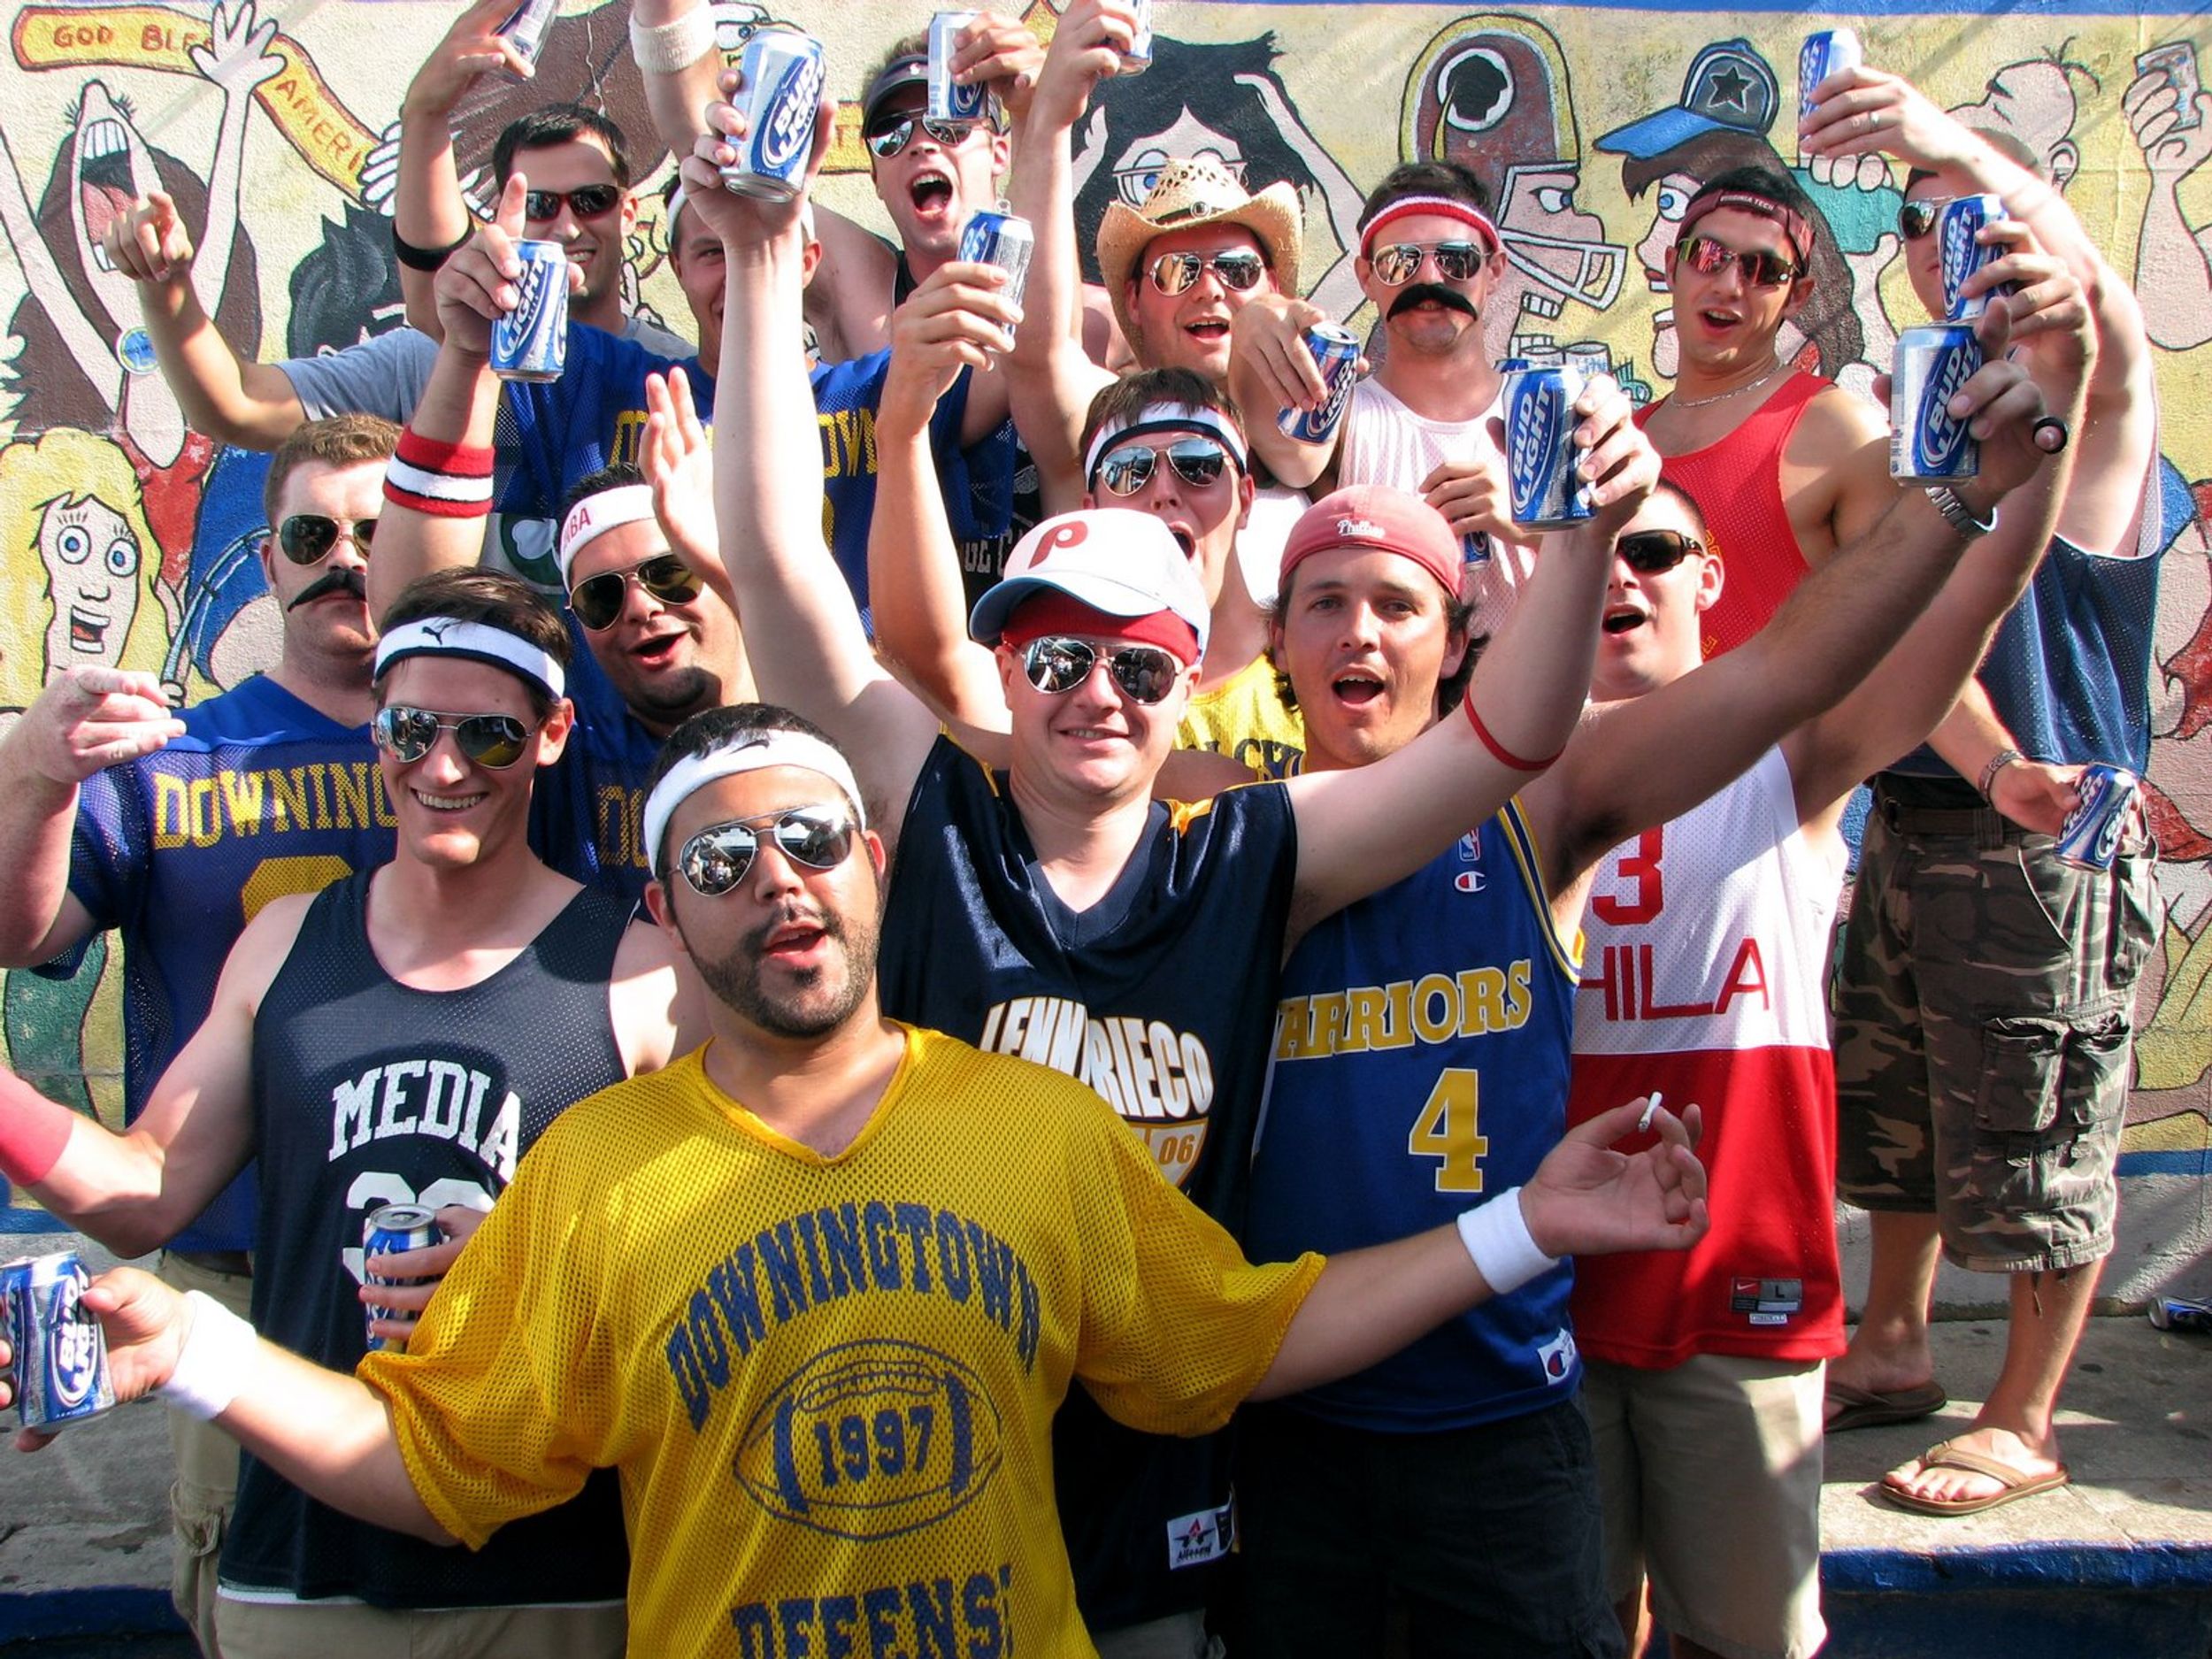 28 Things You'll Hear Every Frat Guy Say